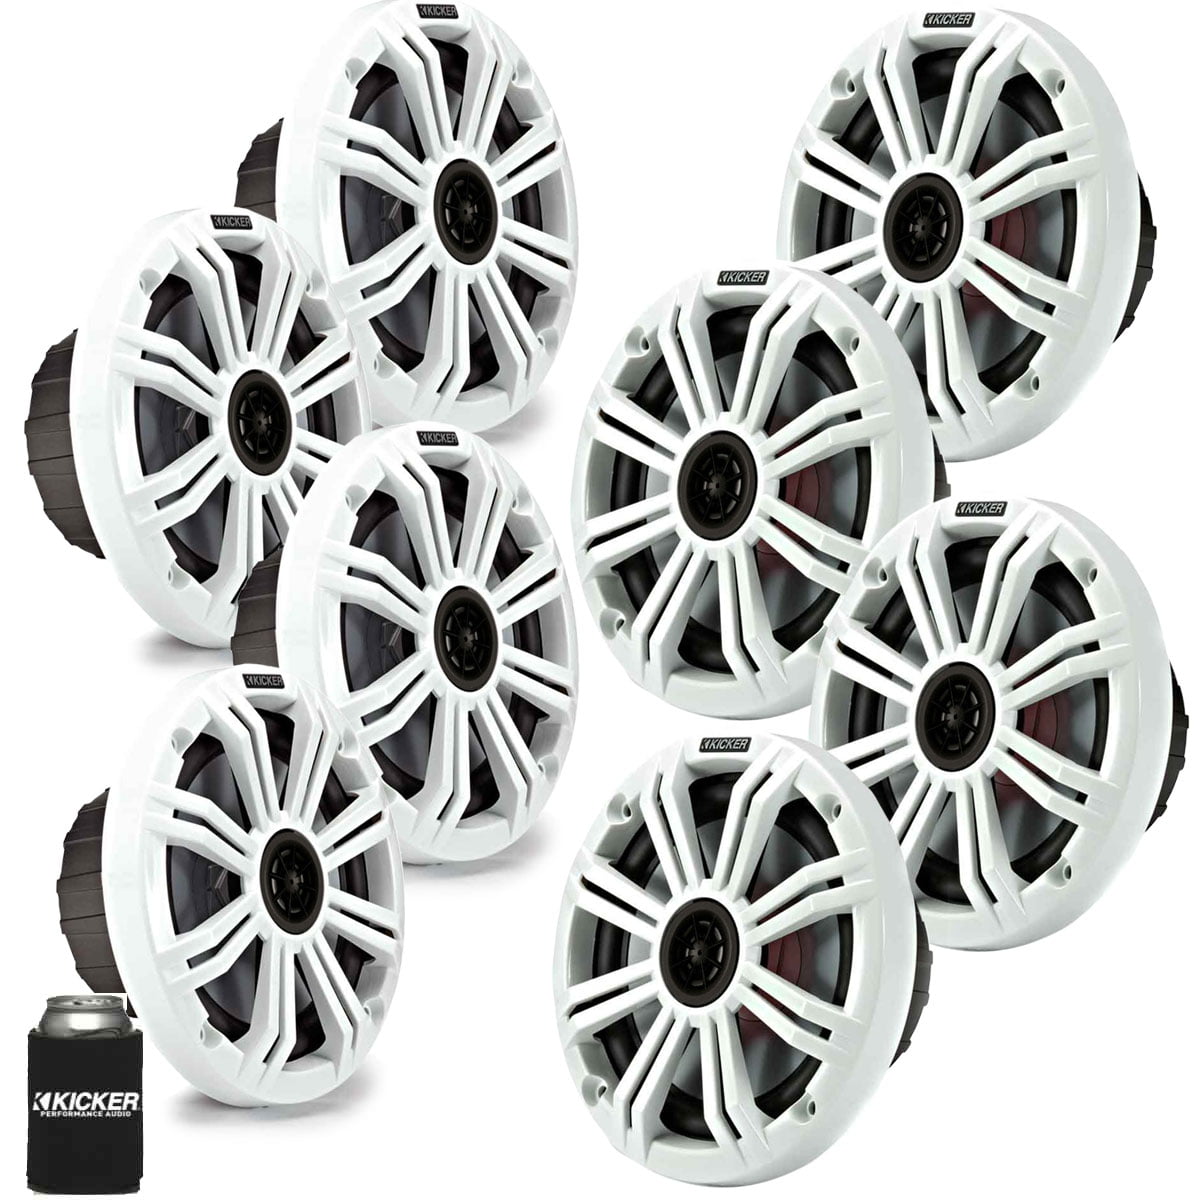 Speaker Wire Details about   4x Kicker 6.5" OEM Replacement Marine White 2-Way LED Speakers 